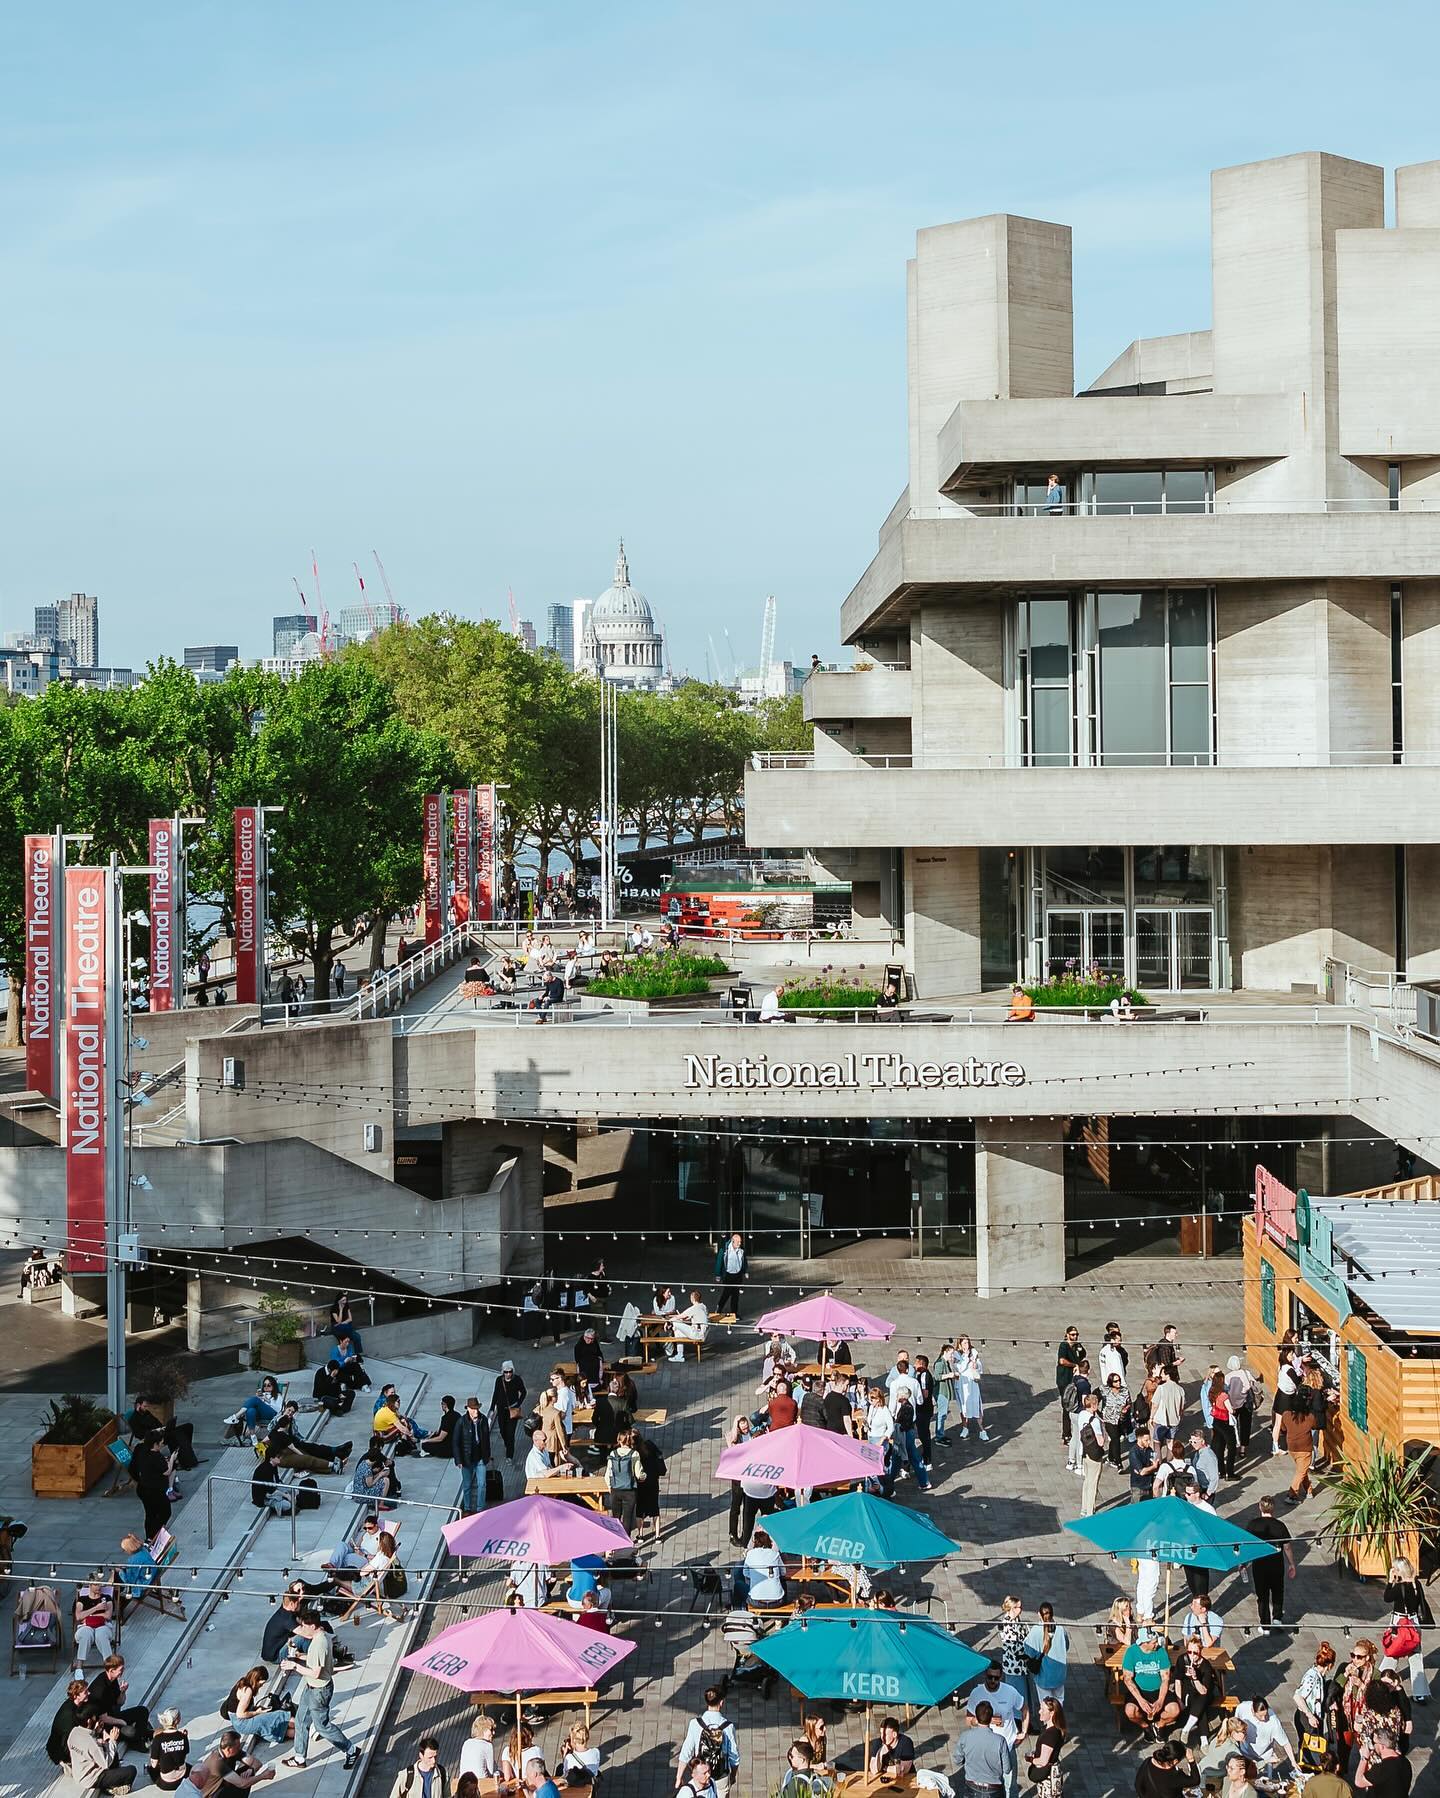 Outdoor seating at National Theatre in summer